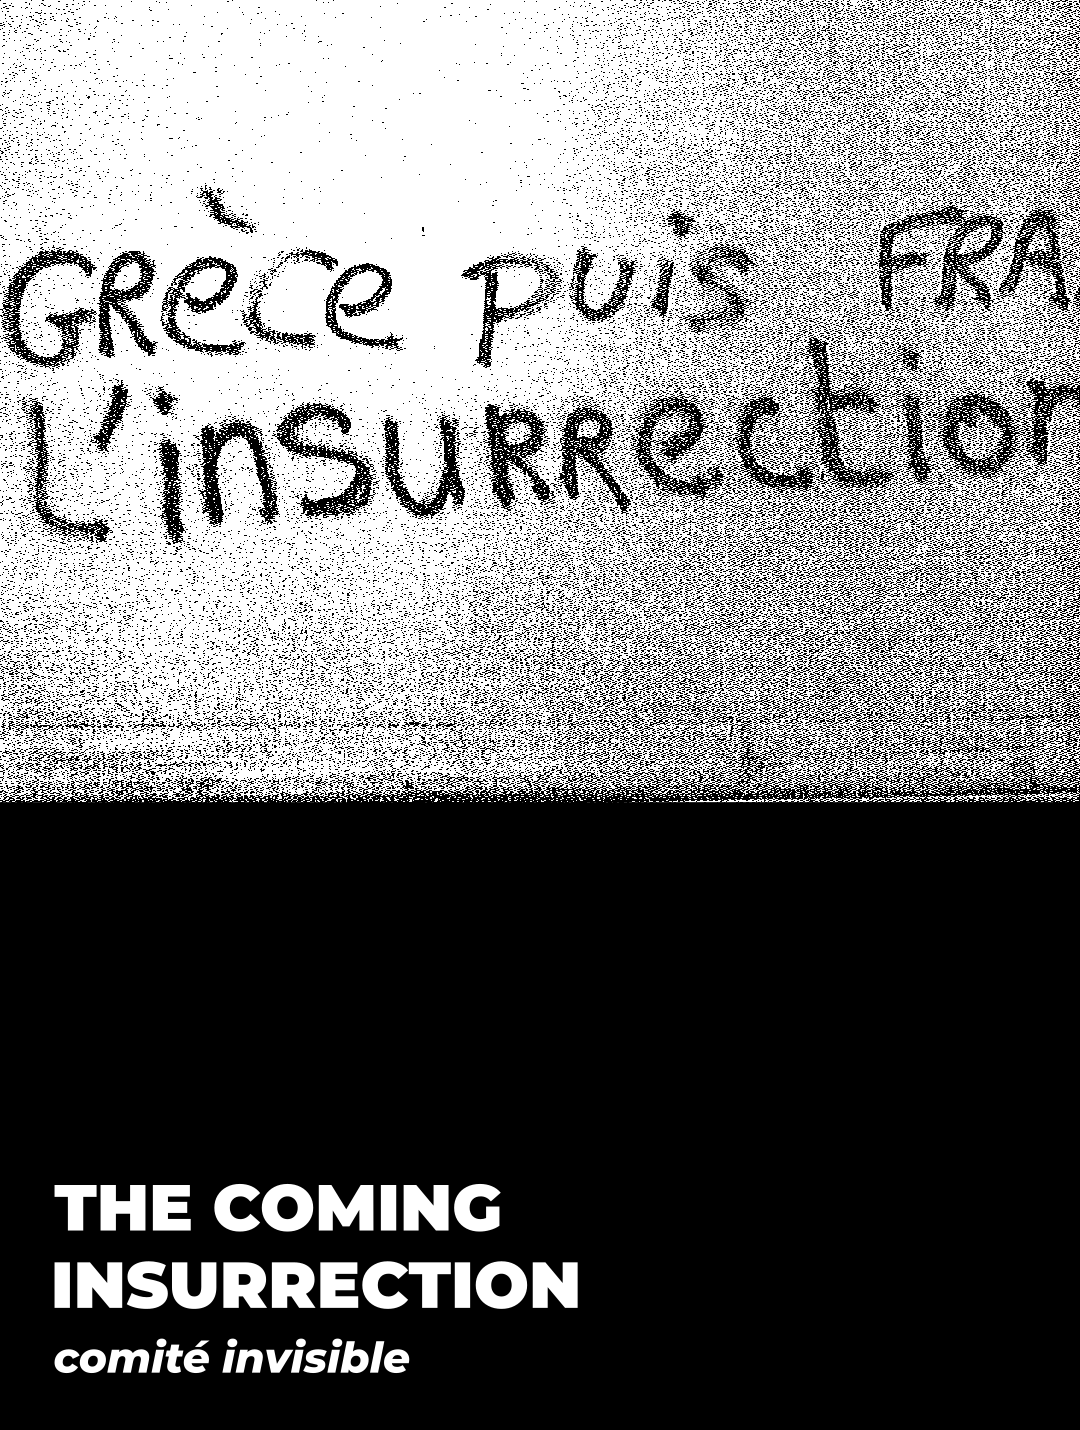 c-i-comite-invisible-the-coming-insurrection-1.png